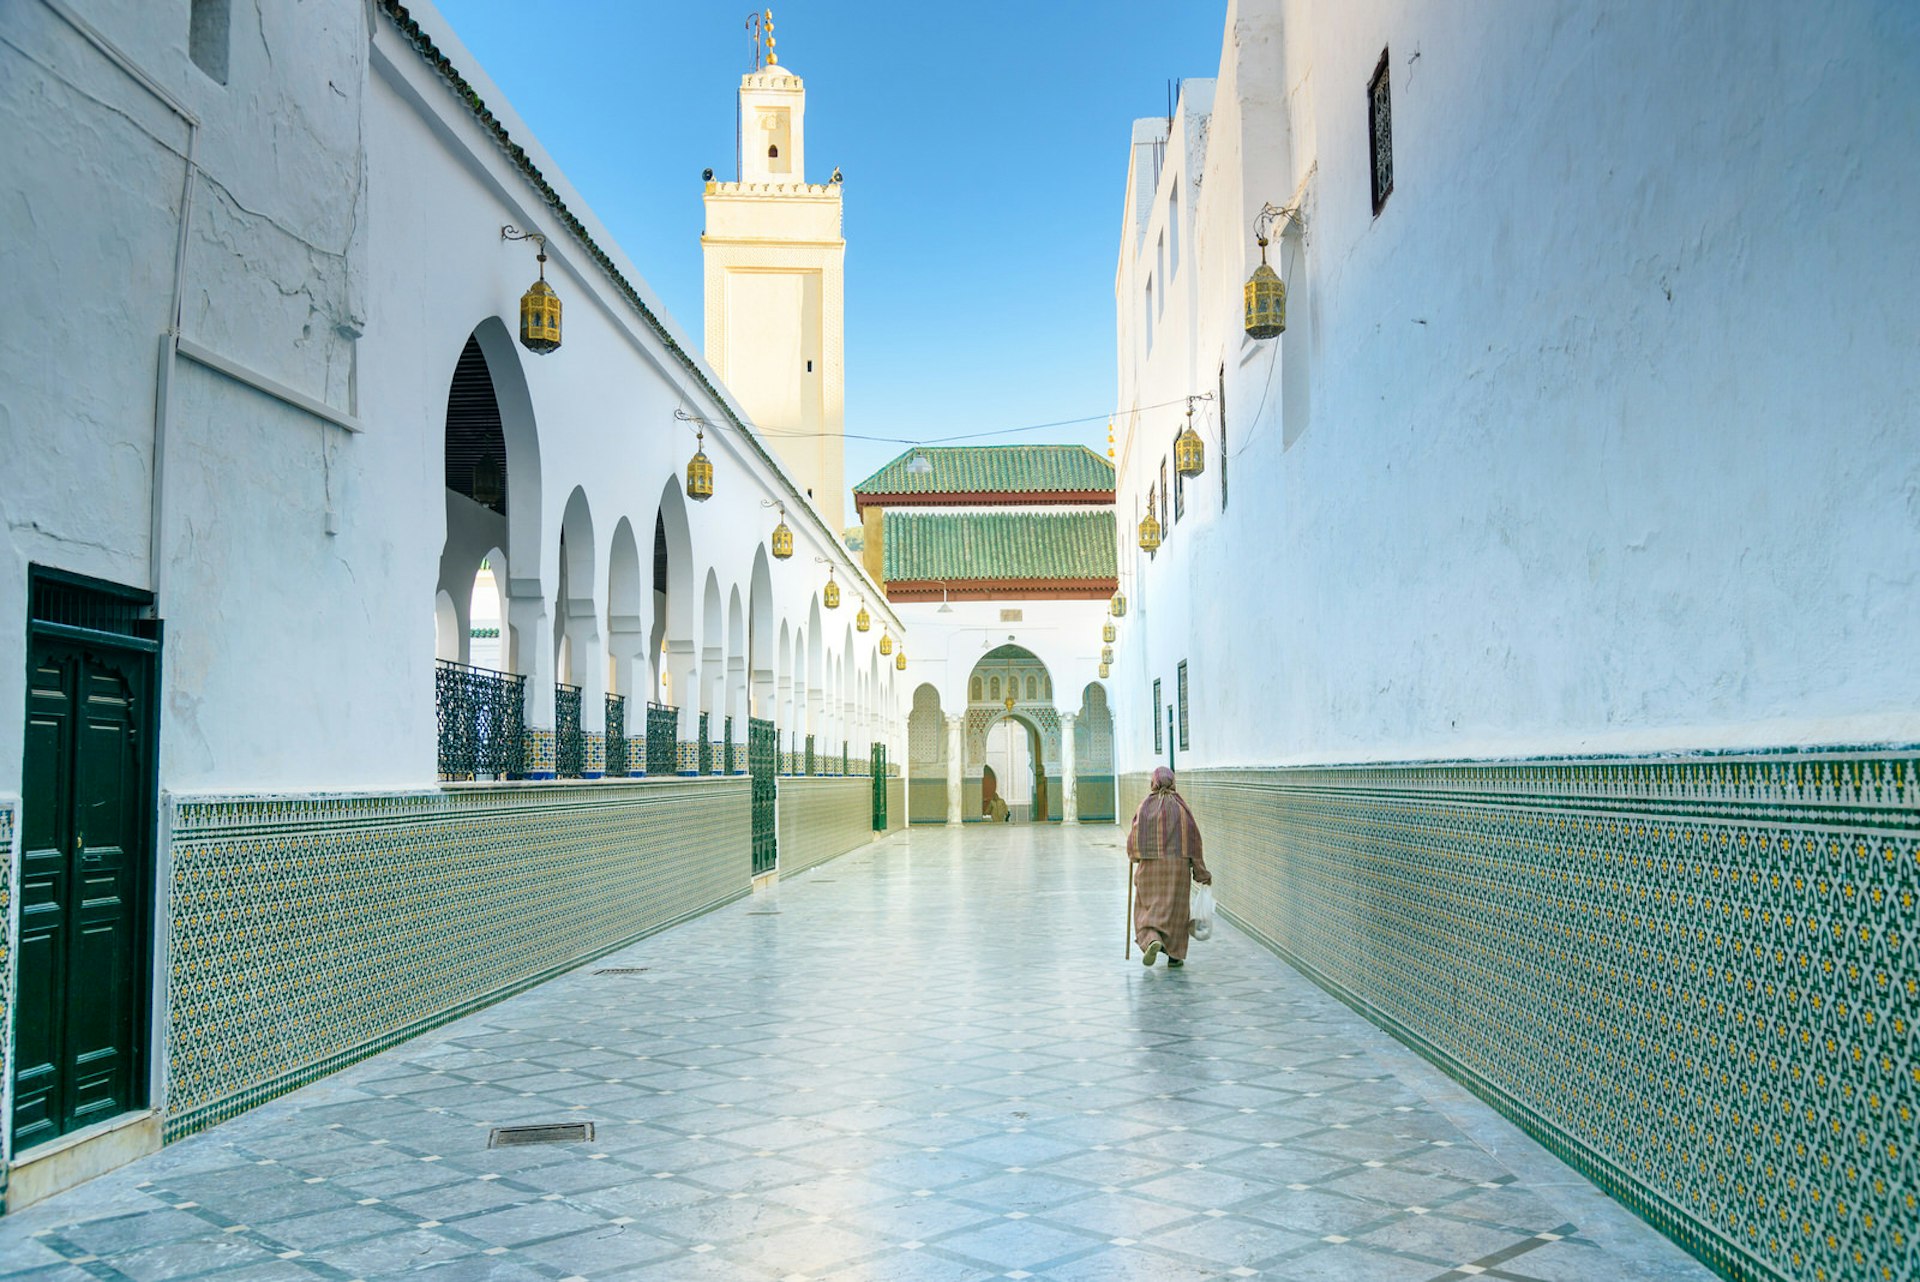 Entrance to Mosque and Tomb of Moulay Idriss, in the holy town of Moulay Idriss © Elena Odareeva / Shutterstock